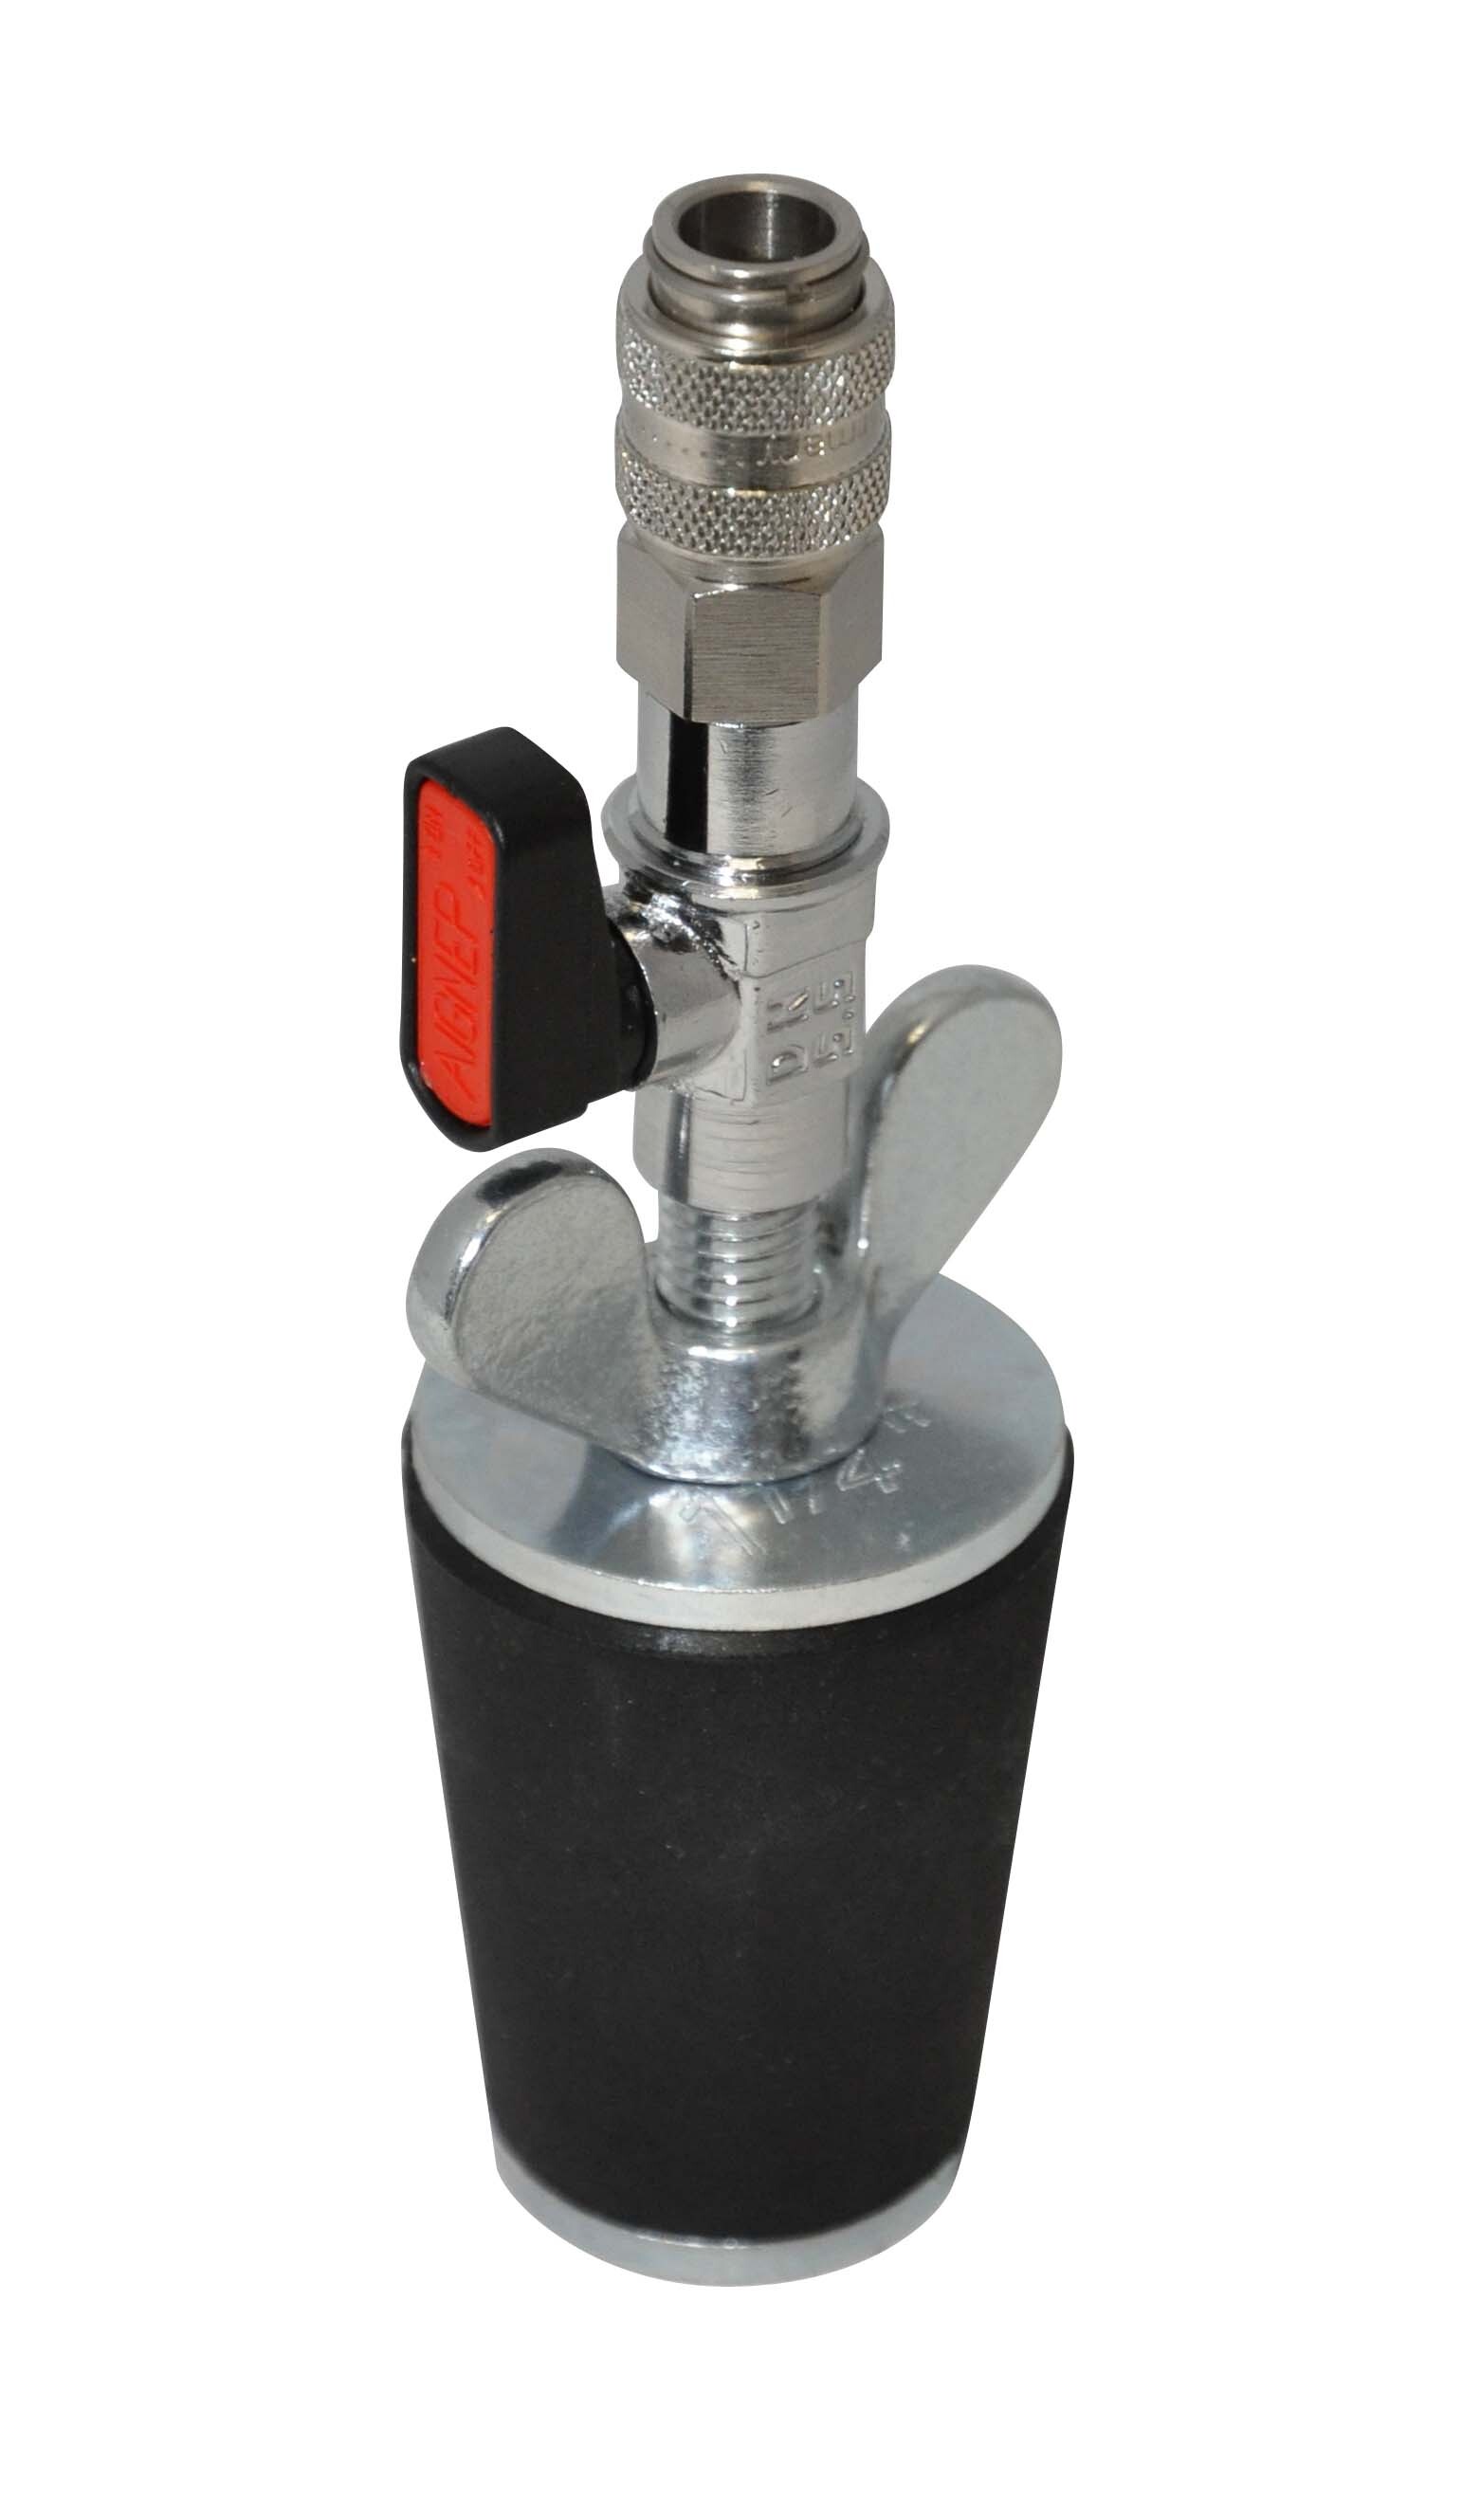 Test plug 1 1/4" conic with ball valve and coupling S 21 cone diameter 30 - 40 mm